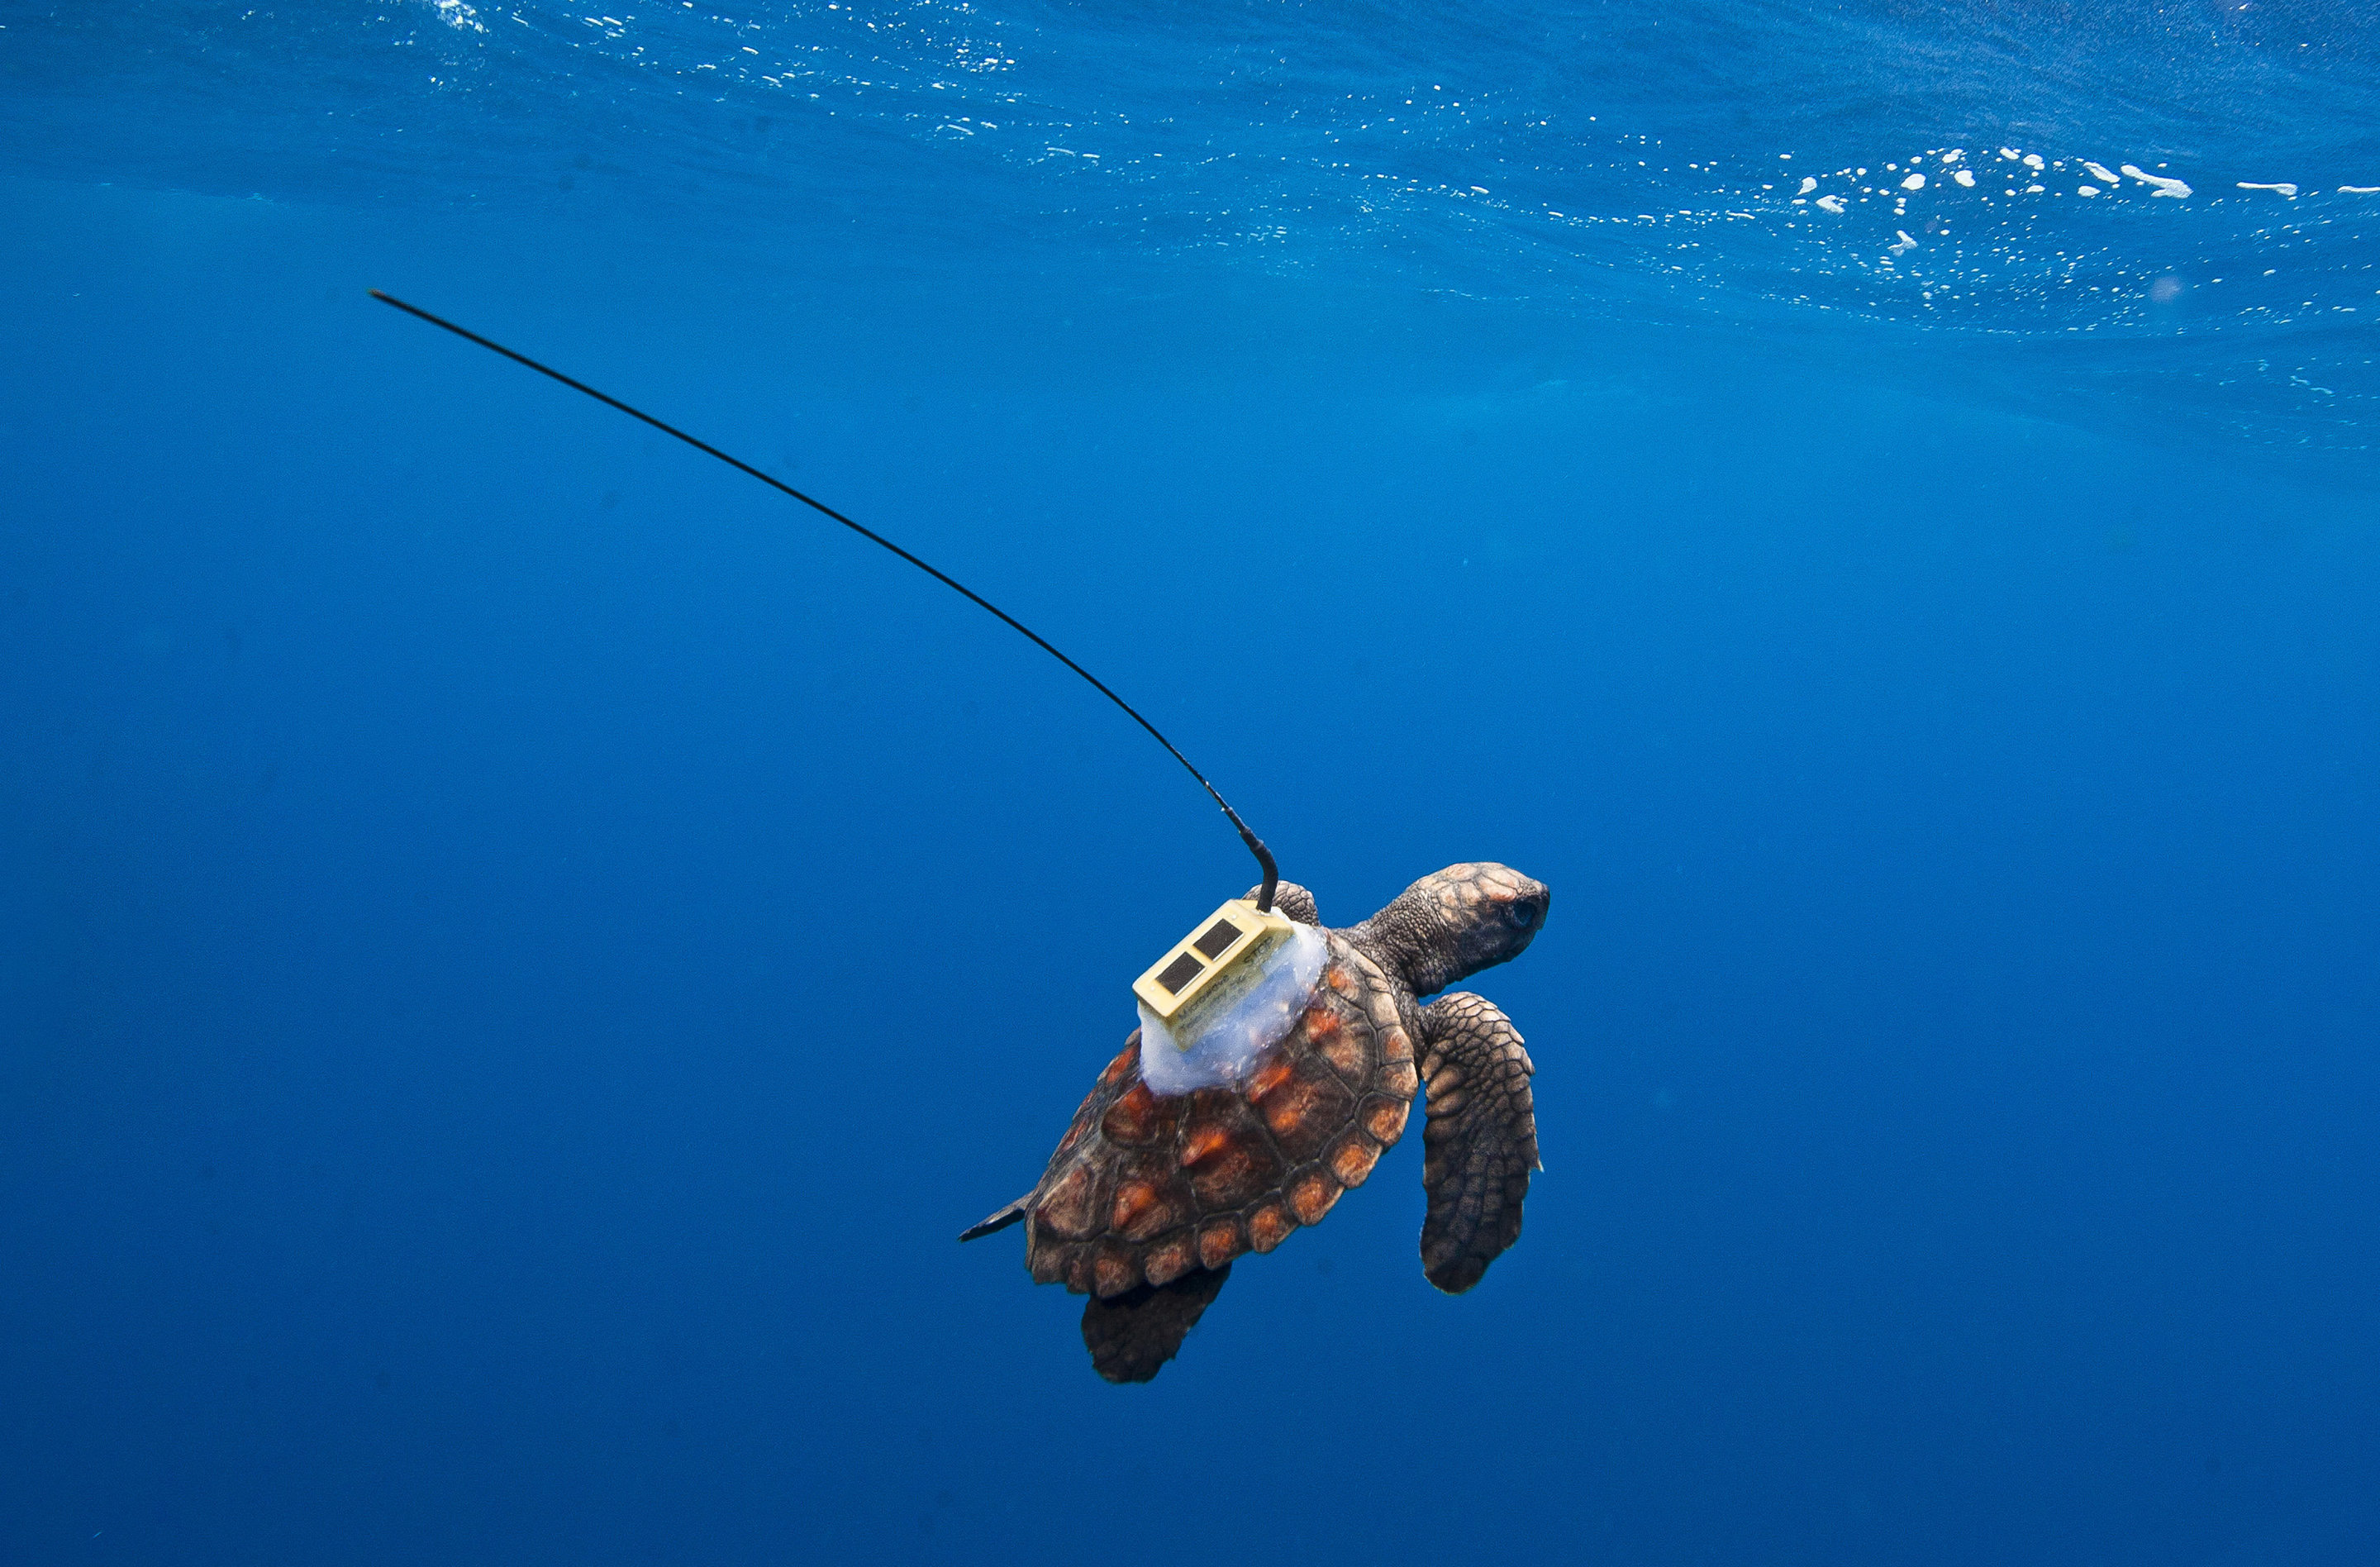 Satellite Tracking Provides Clues About South Atlantic Sea Turtles